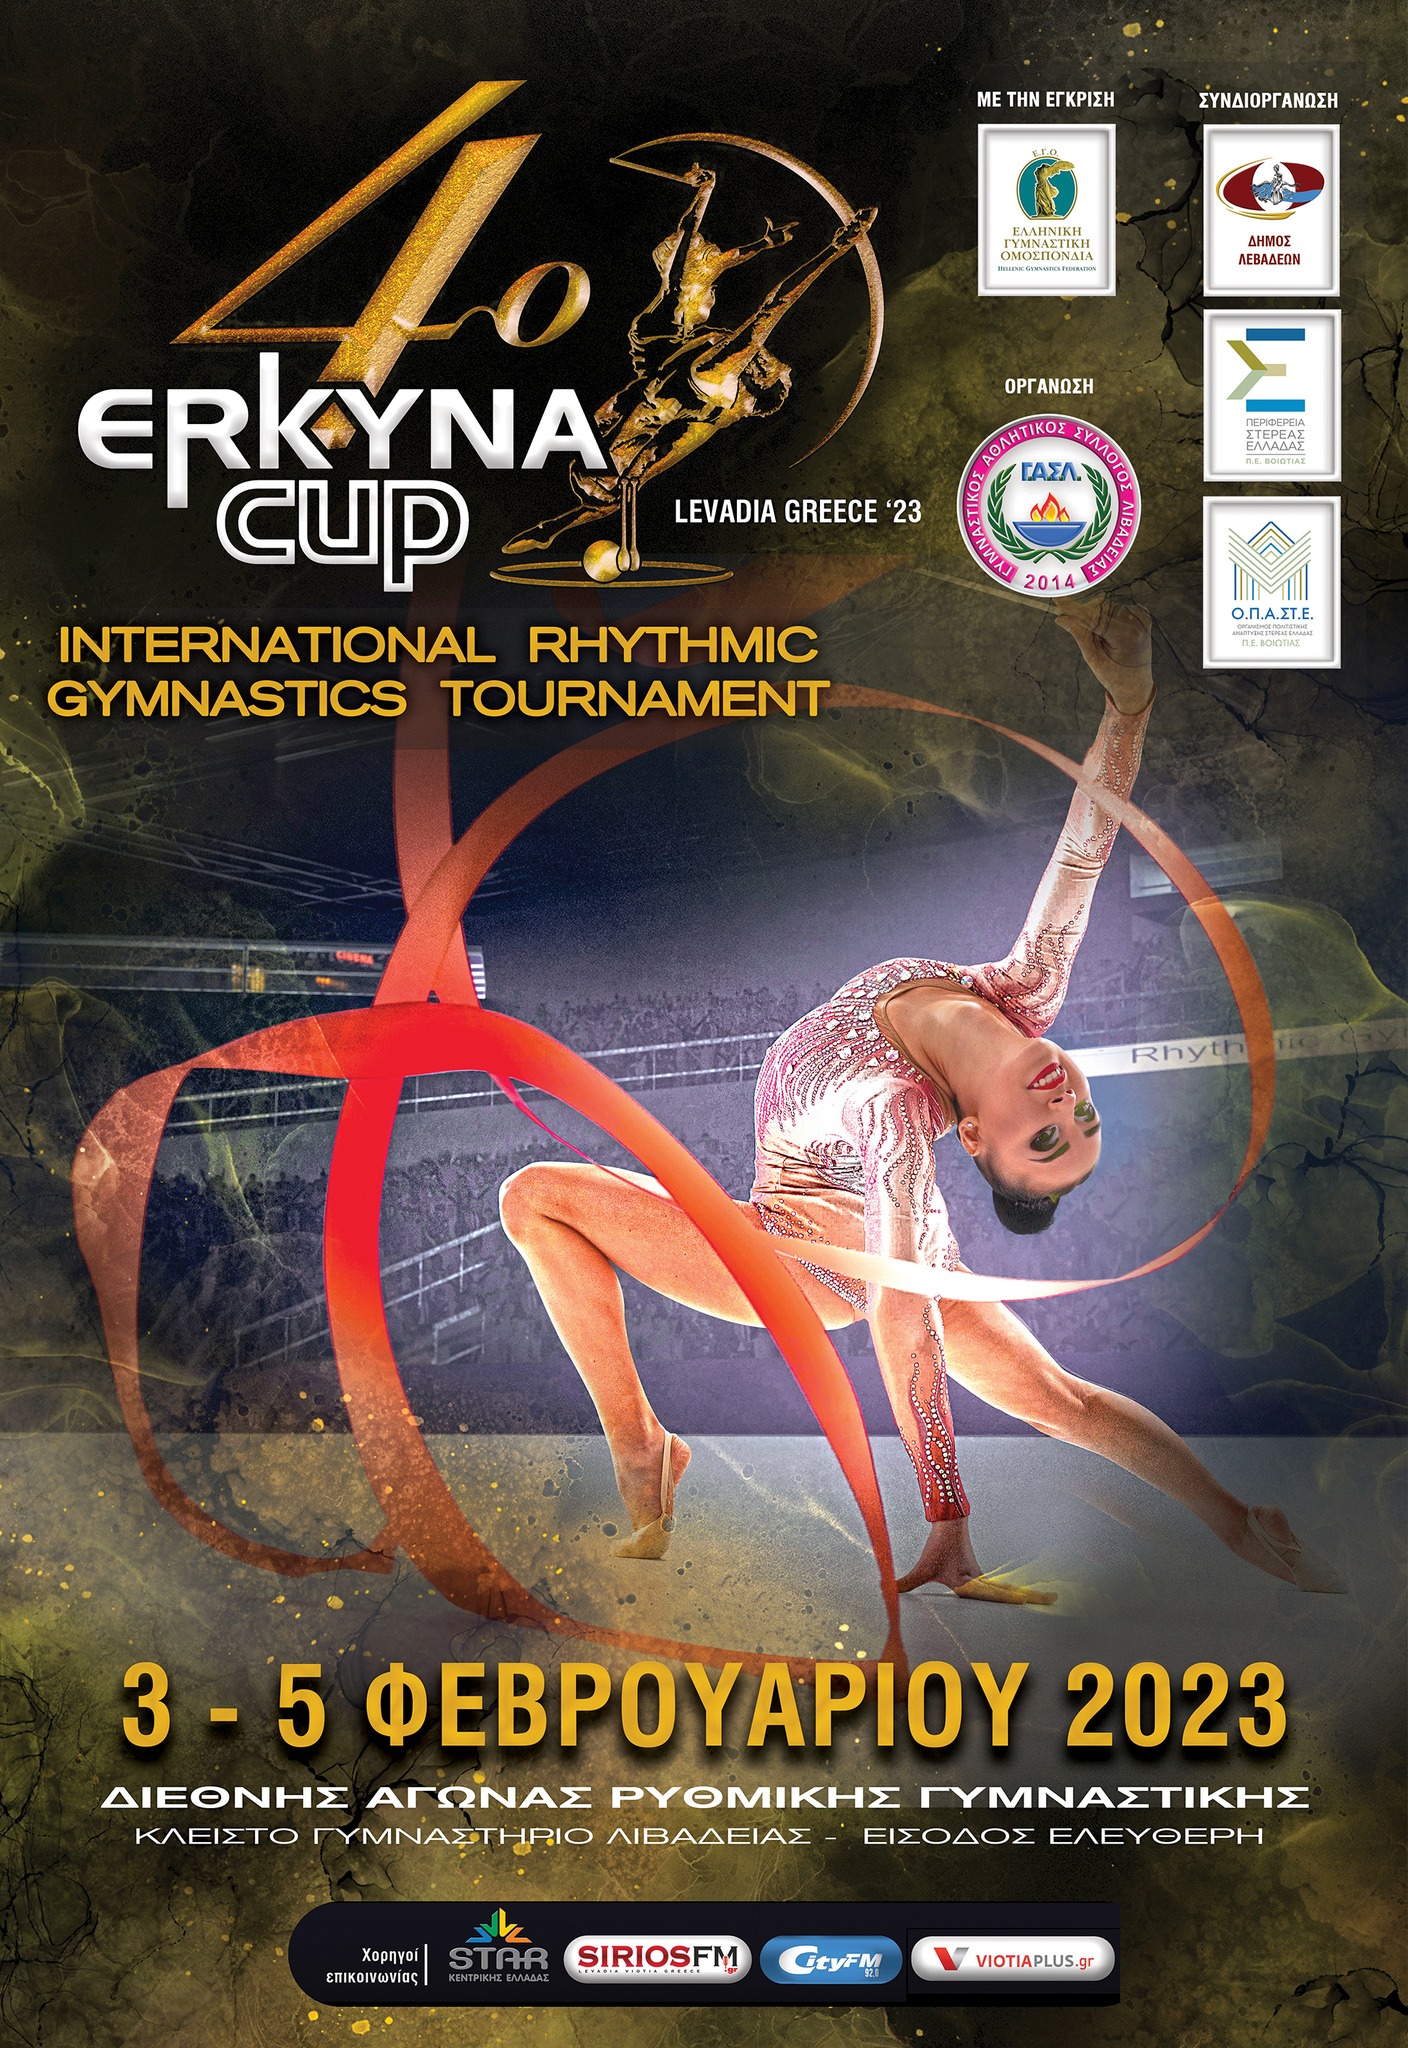 Erkyna Cup poster